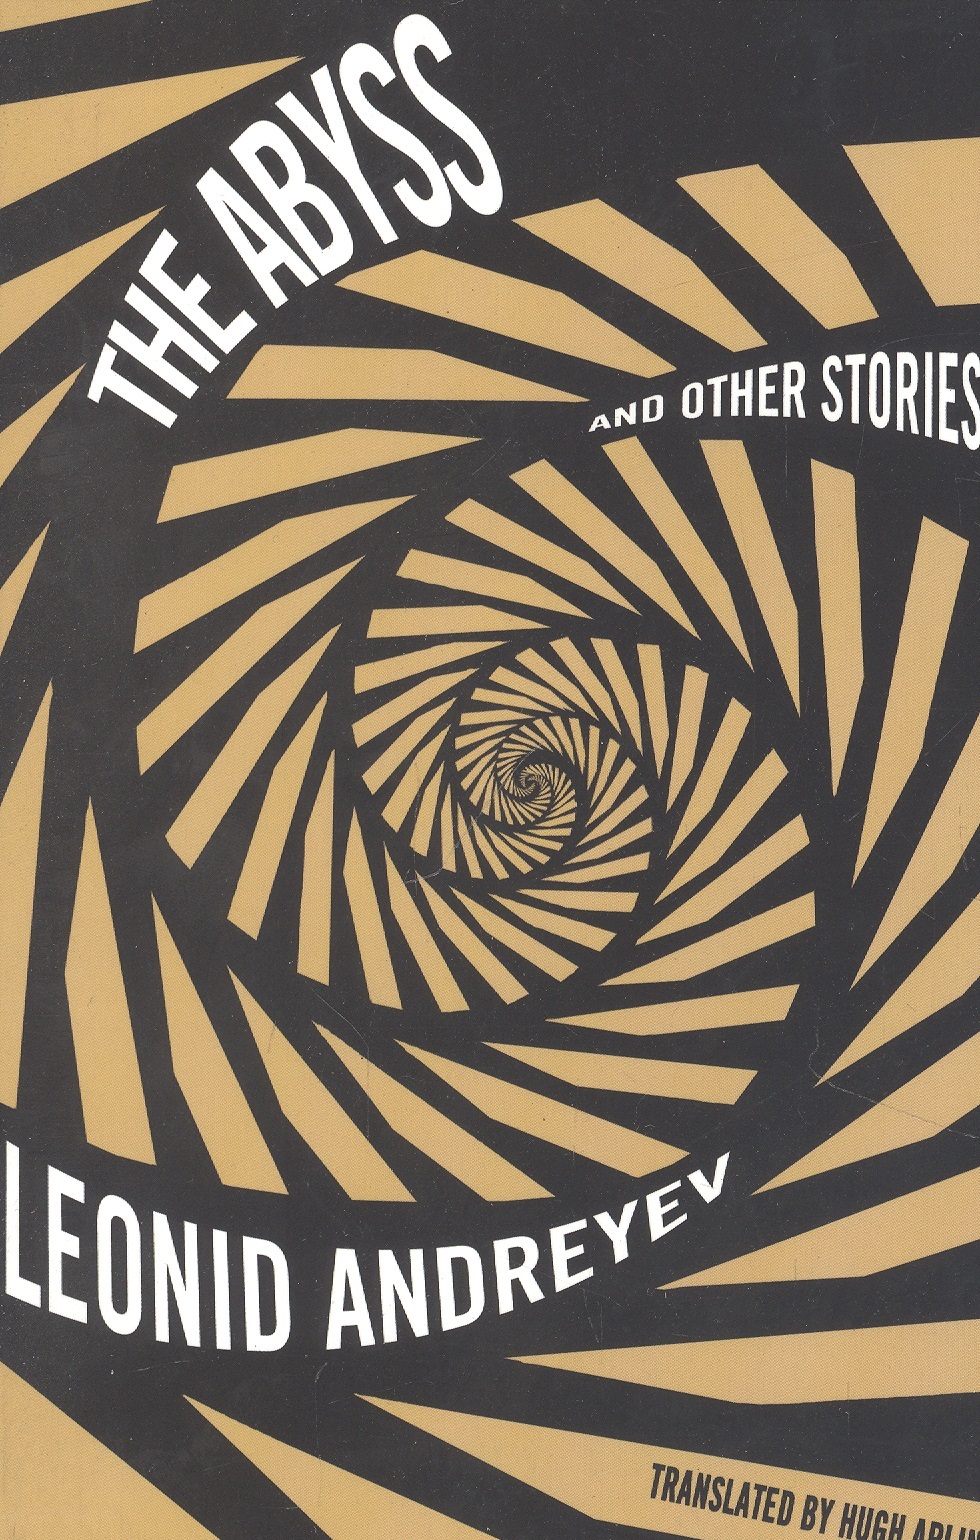 Abyss and Other Stories rendell r the thief and other stories